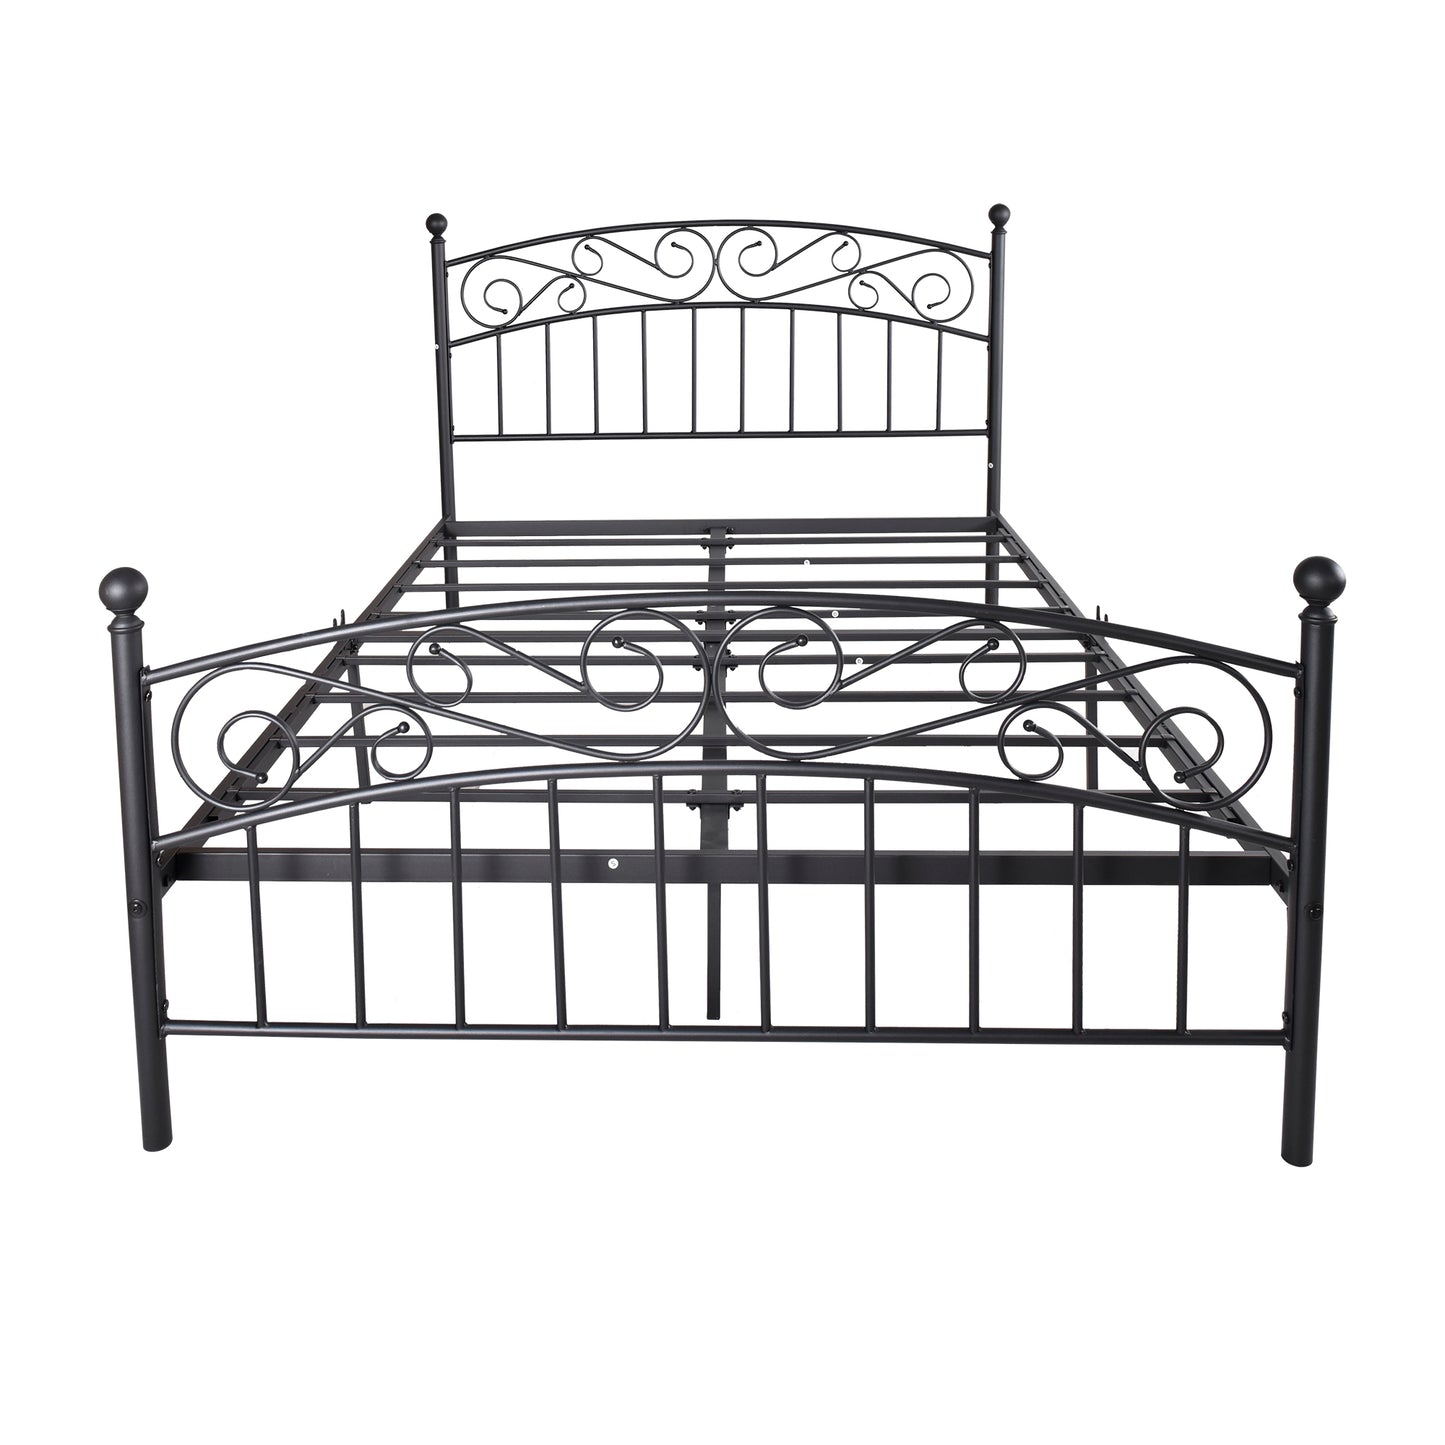 Metal bed frame Platform mattress foundation with headboard and footrest, heavy duty and quick assembly, Queen Black